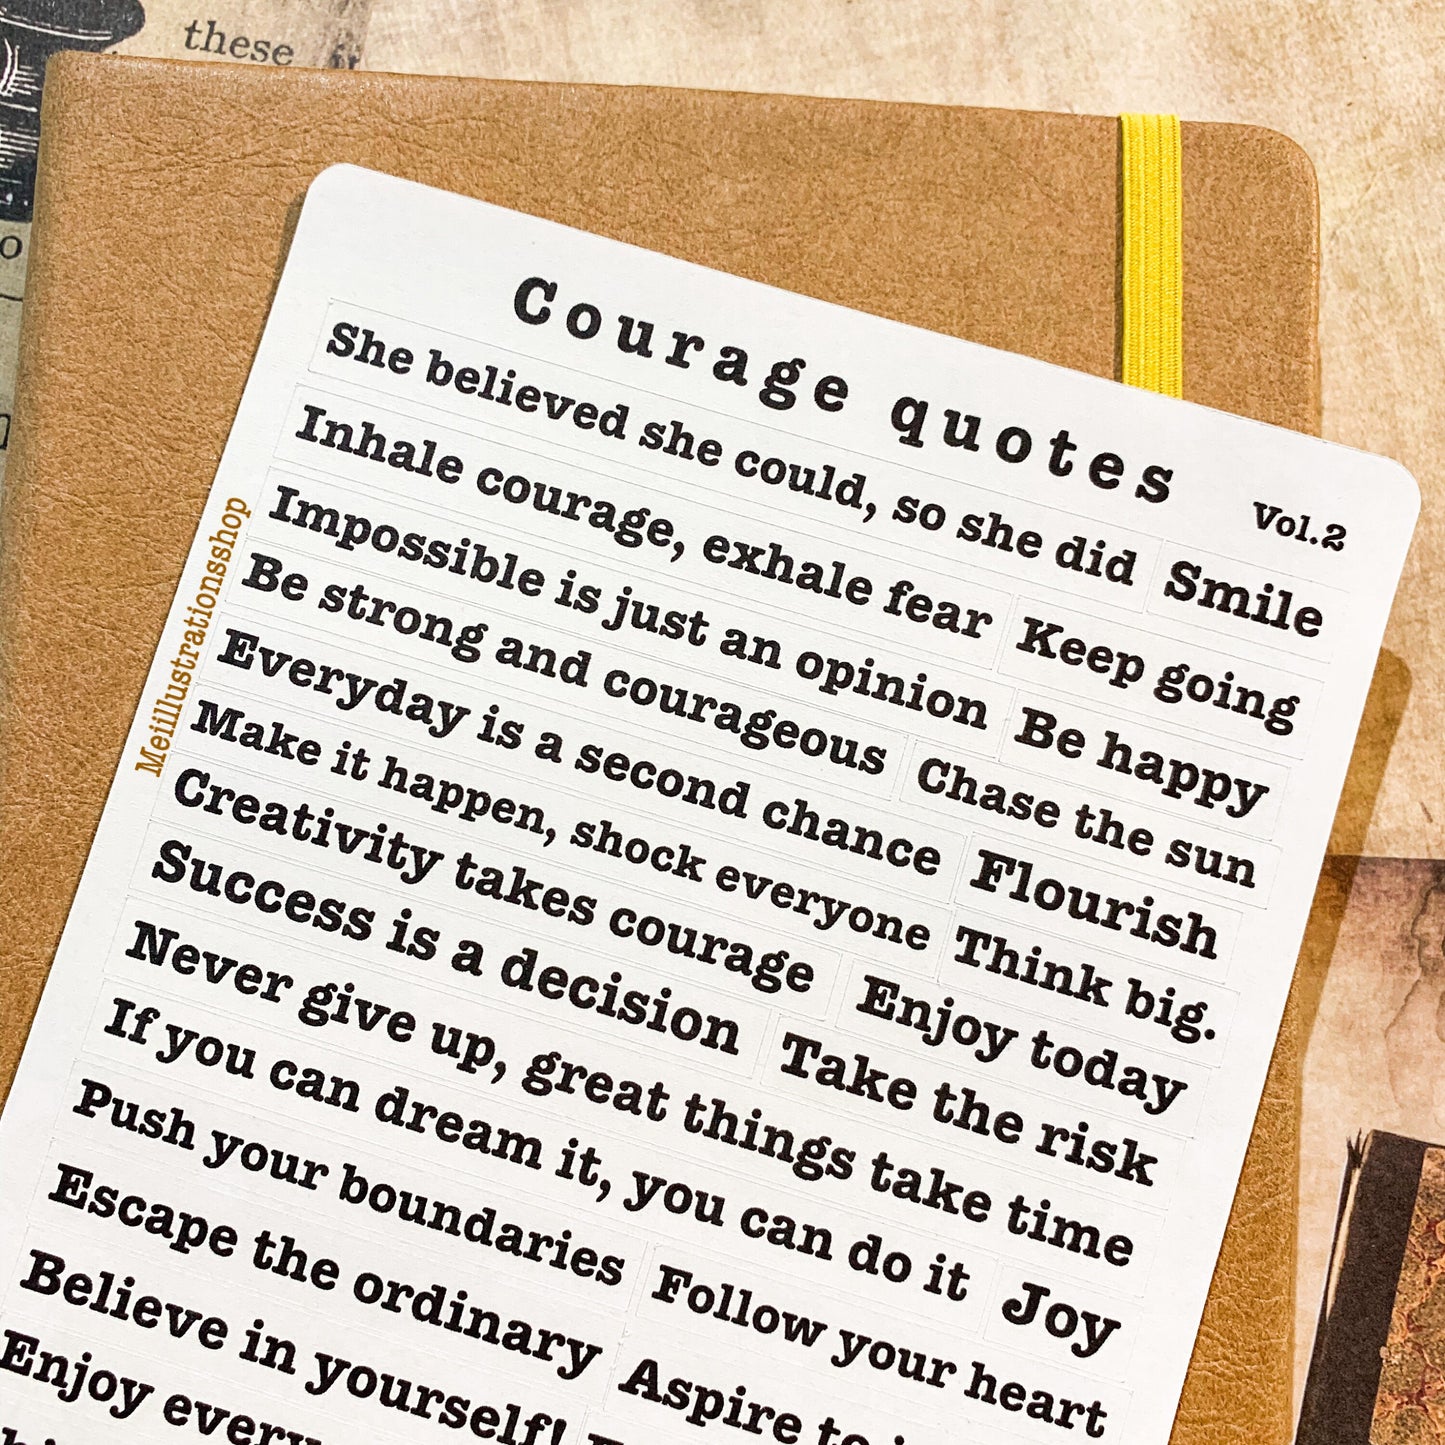 Courage quotes in bold type sticker sheet